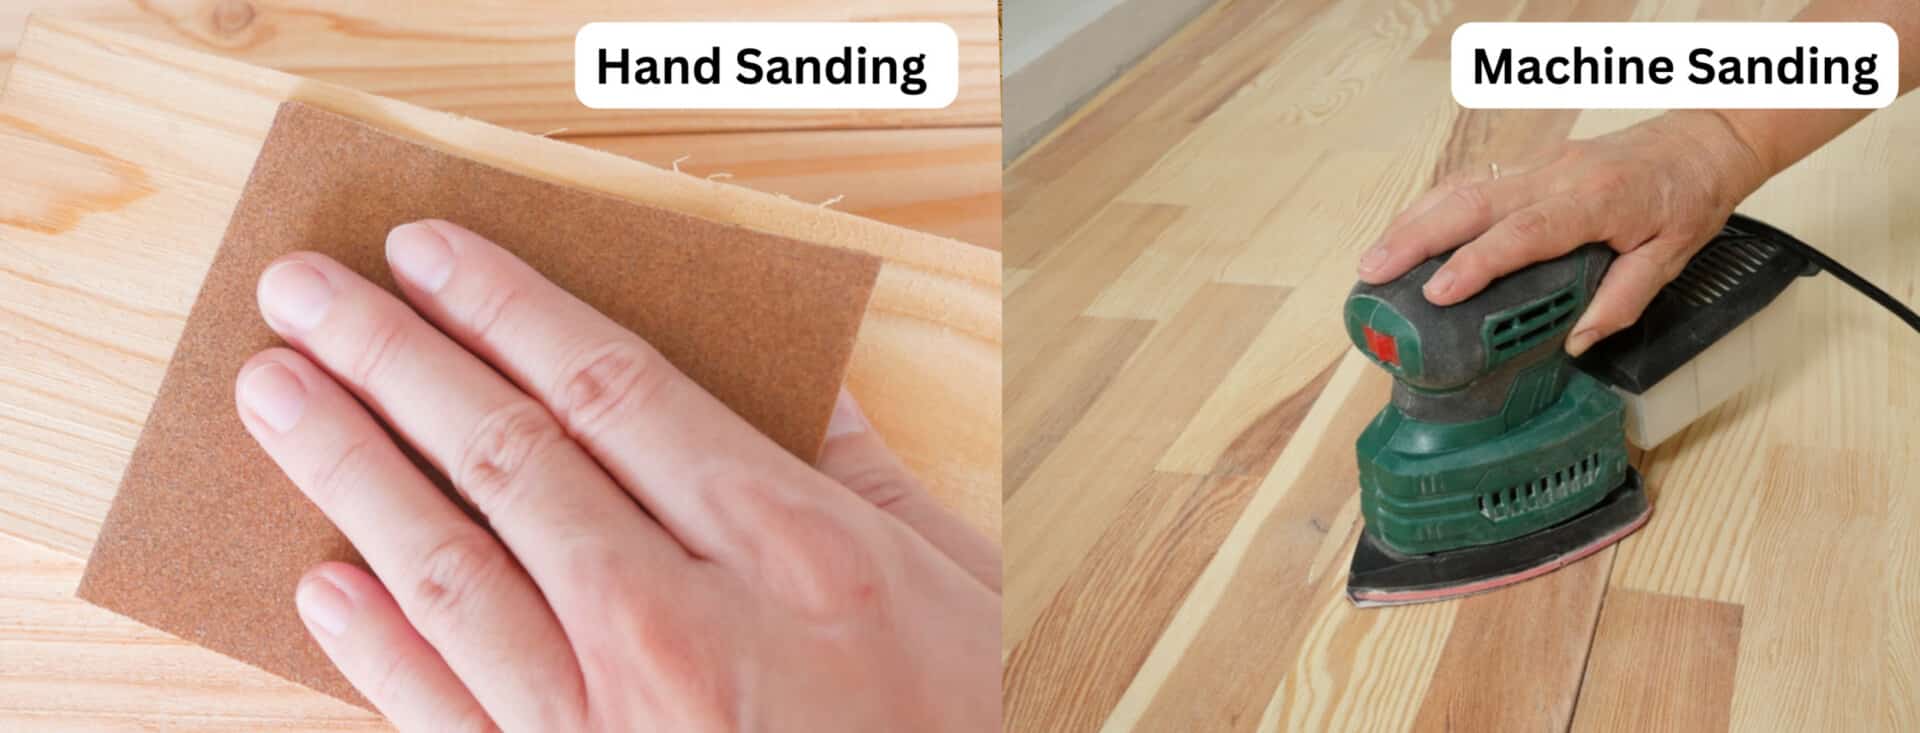 Side-by-side images of hand sanding and machine sanding on wooden floors.